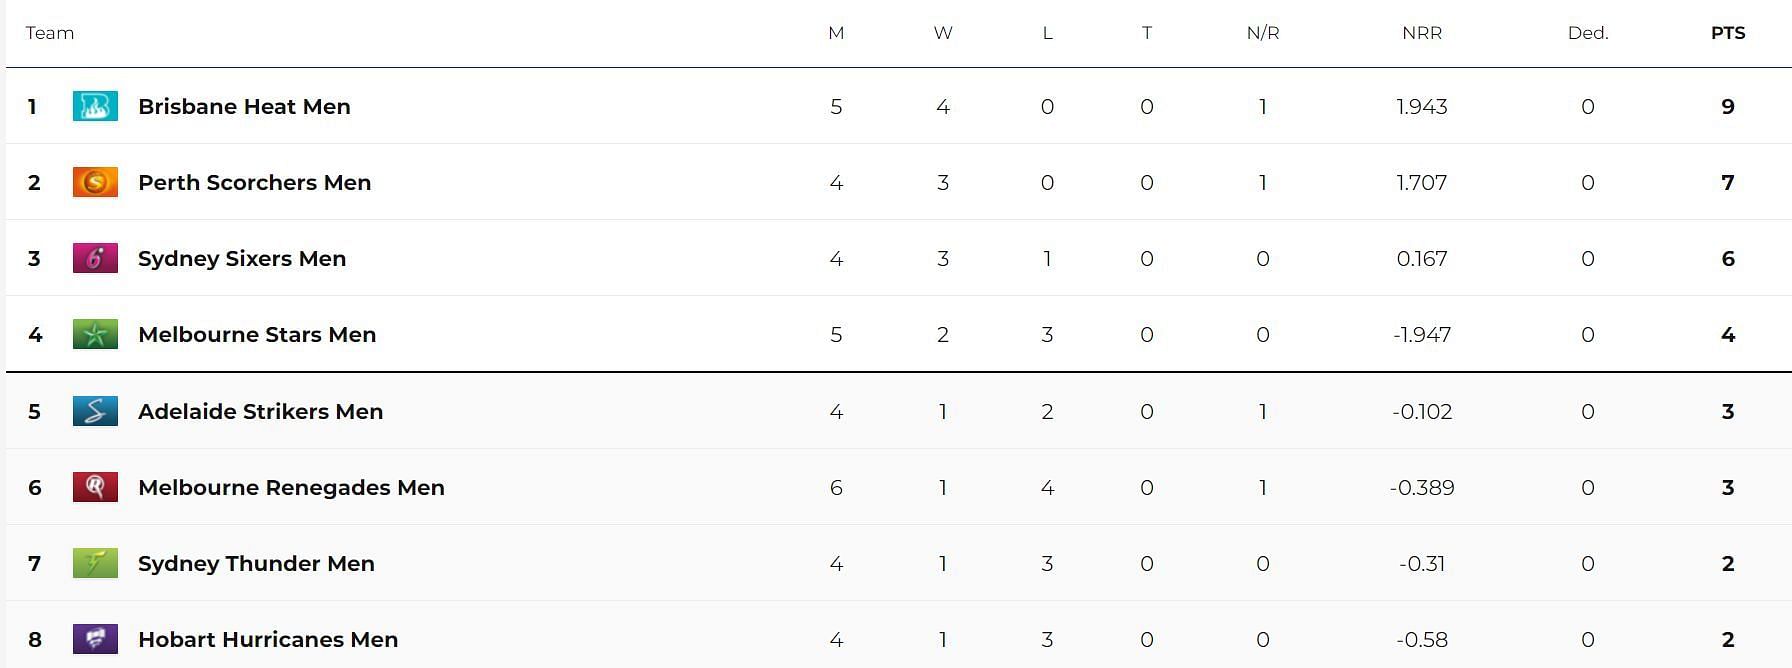 Updated Points Table after Match 18 (Image Courtesy: cricket.com.au)